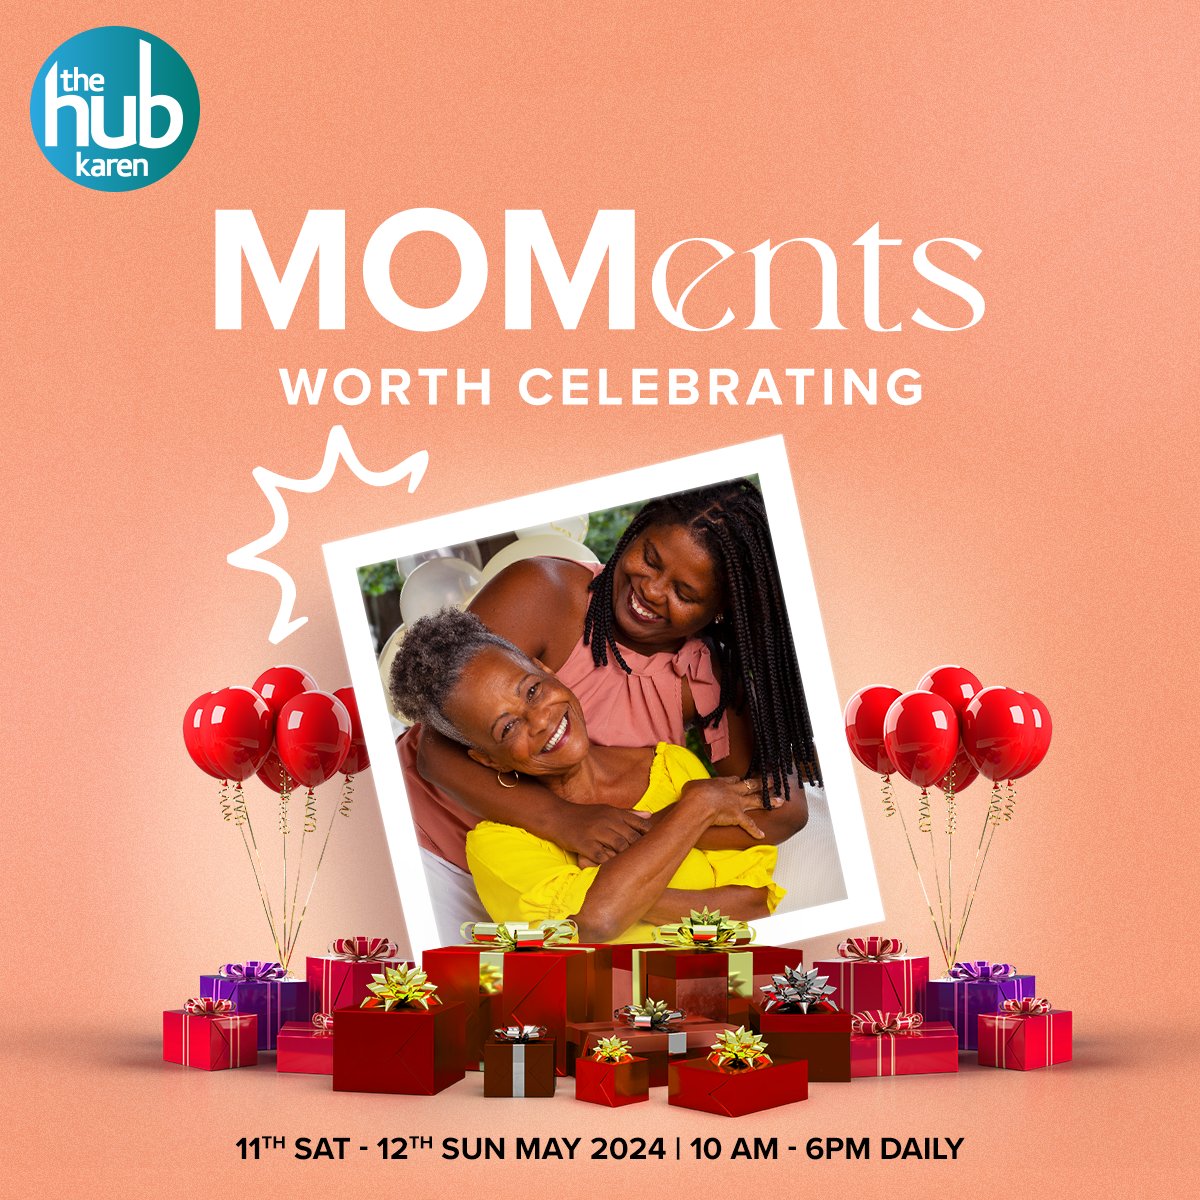 Capture unforgettable MOMents at The Hub! From striking a pose at our picture area to savoring a delightful lunch together, embark on a day of shopping, laughter, and cherished bonding time💖.

#MomMoments #BondingAtTheHub #CherishedMemories